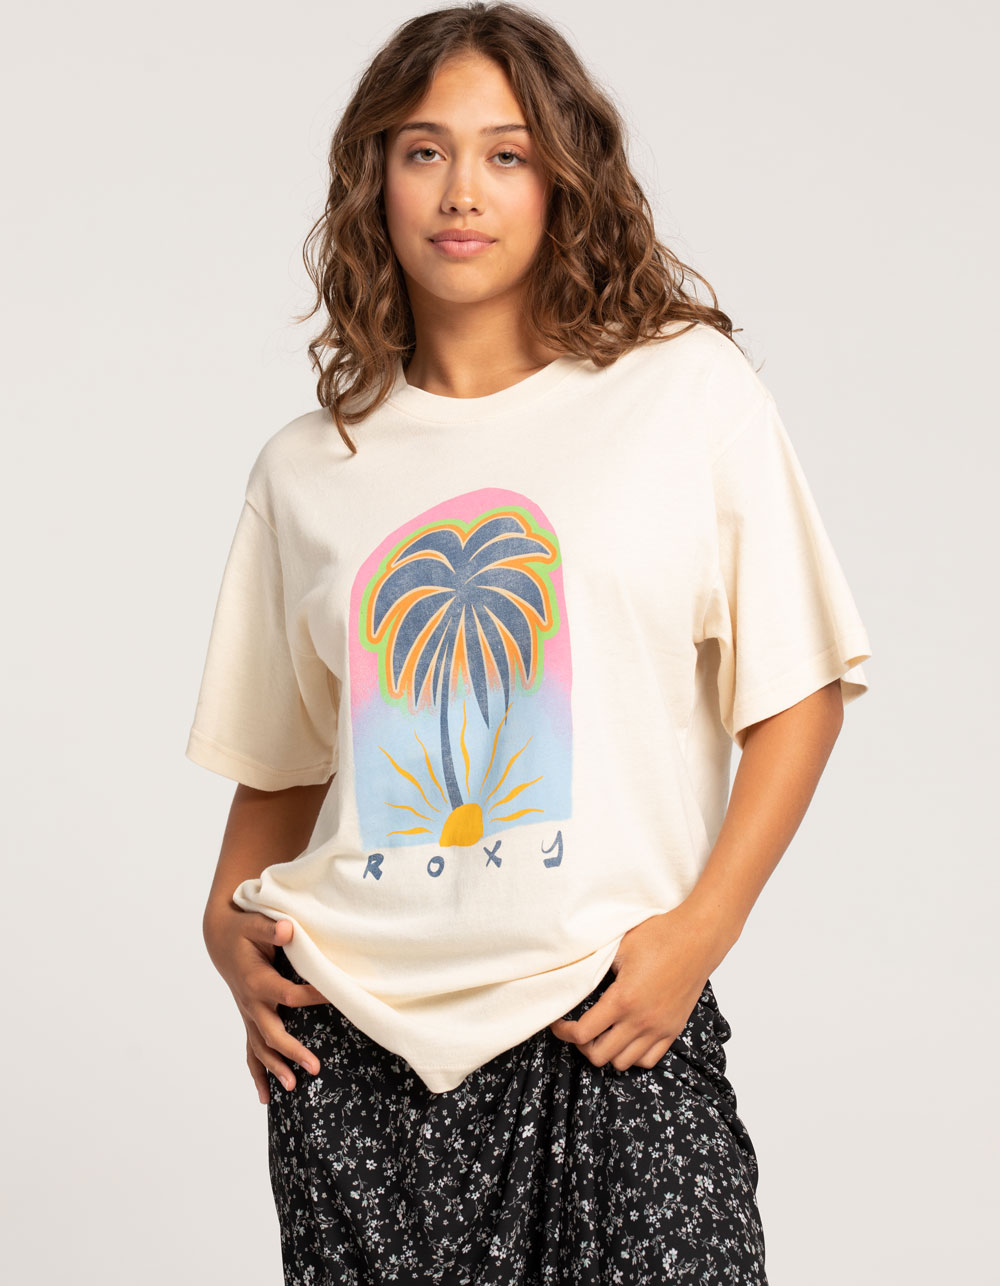 Roxy Clothing, Shoes, & Bags | Tillys